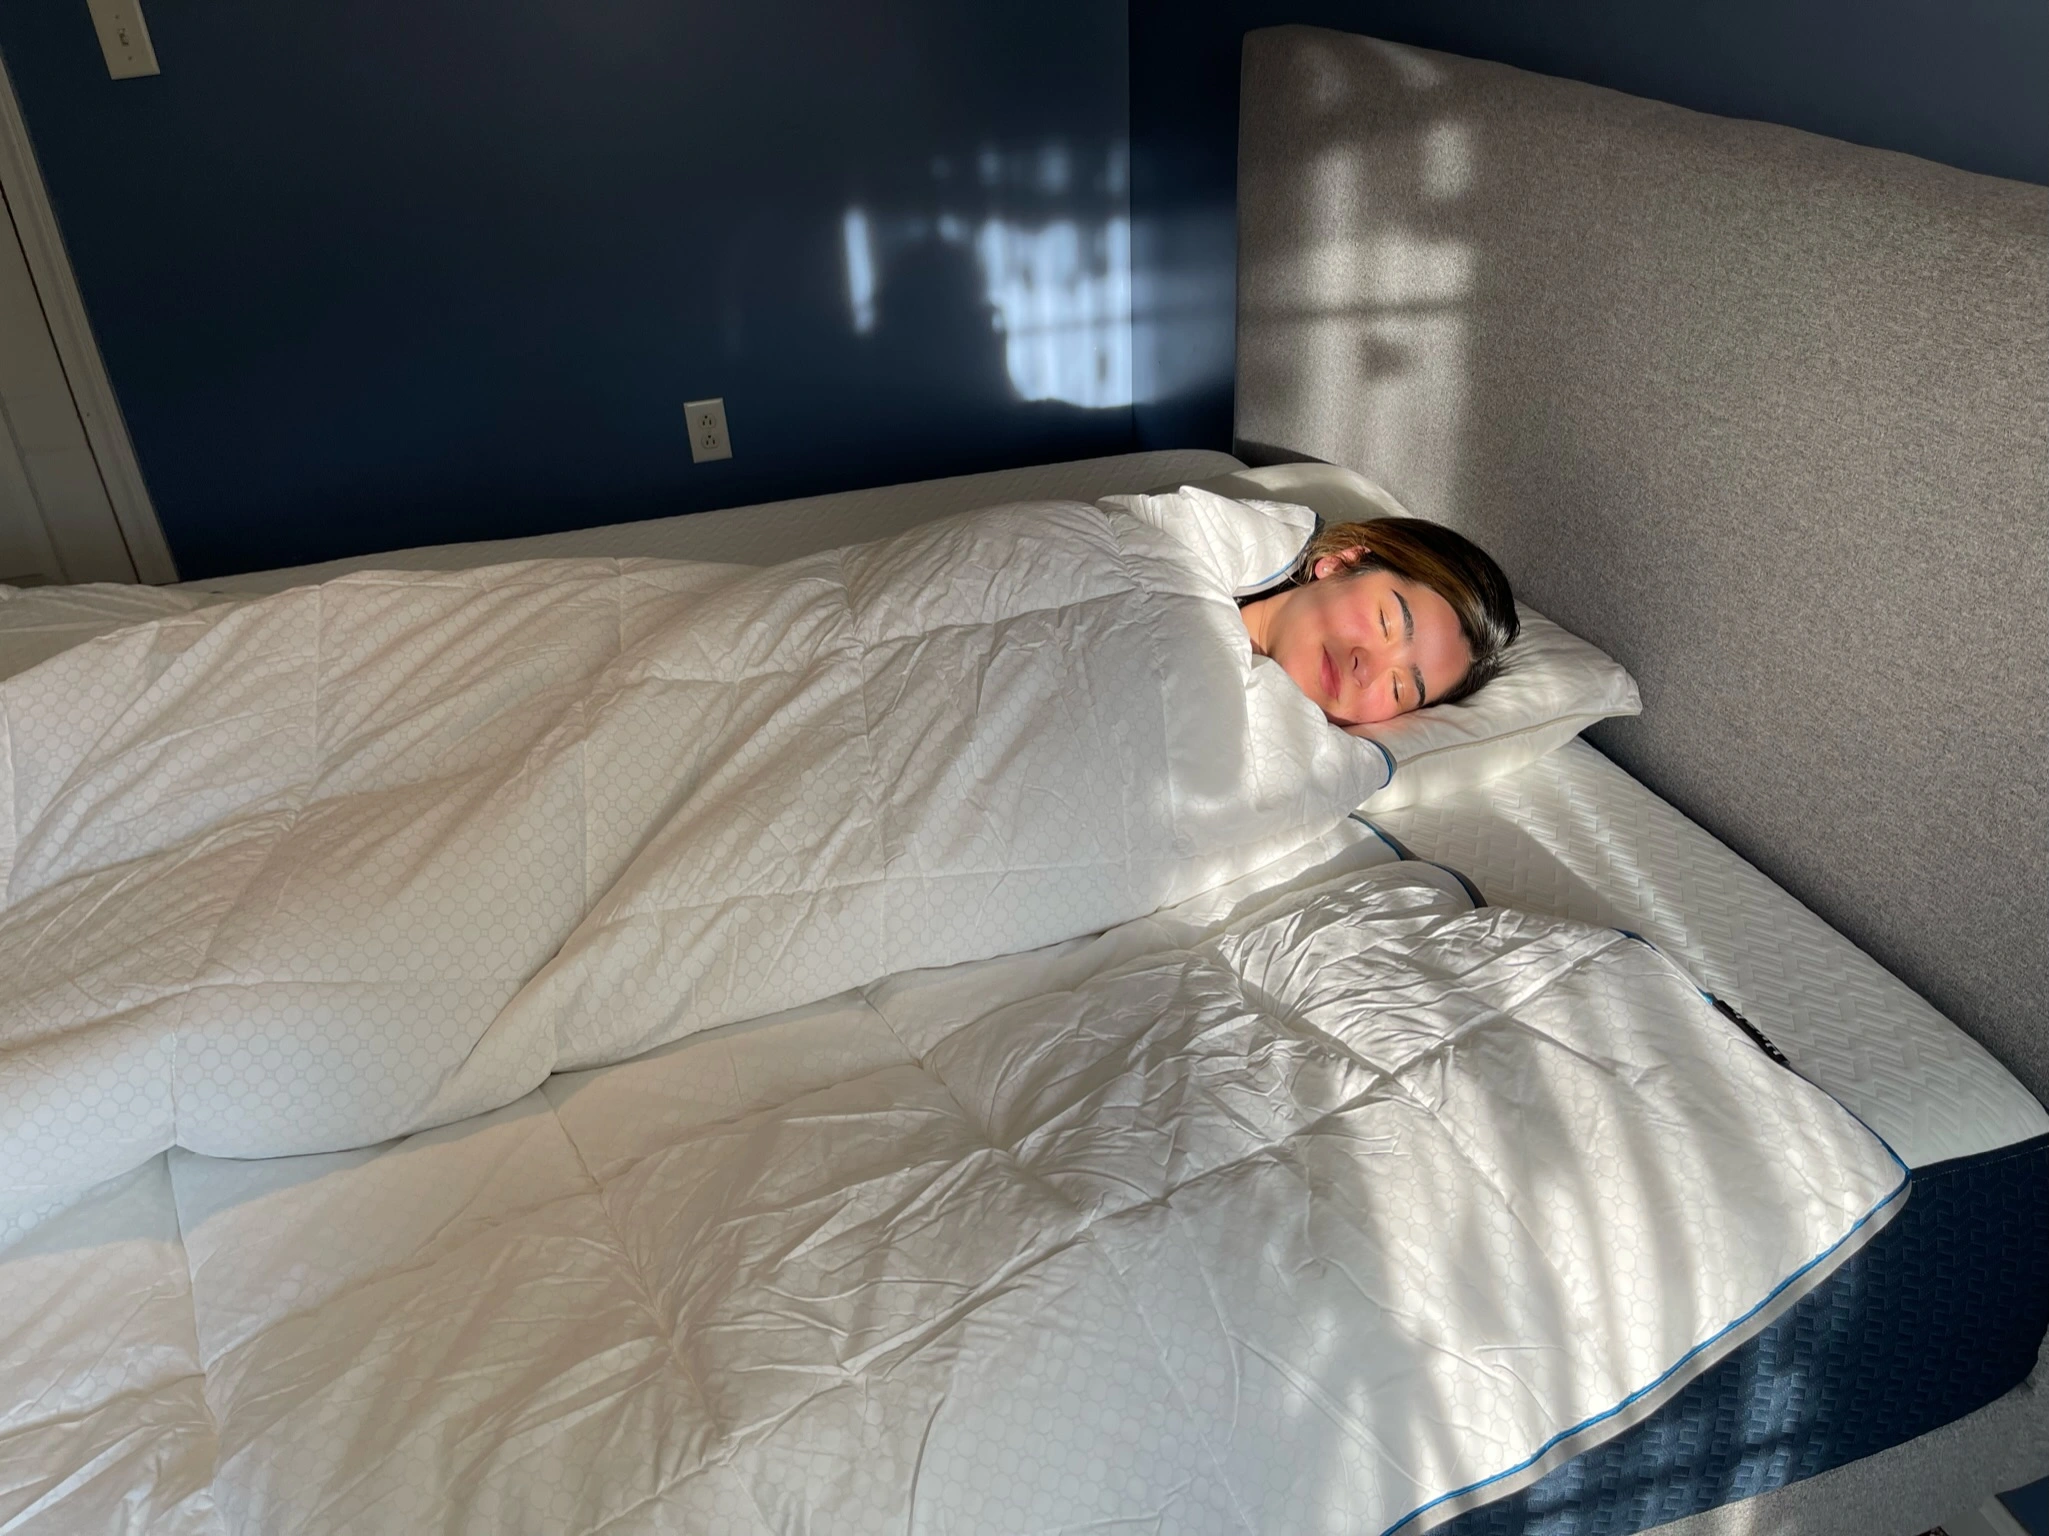 Our reviewer taking a nap with the Hush microgravity duvet in our studio